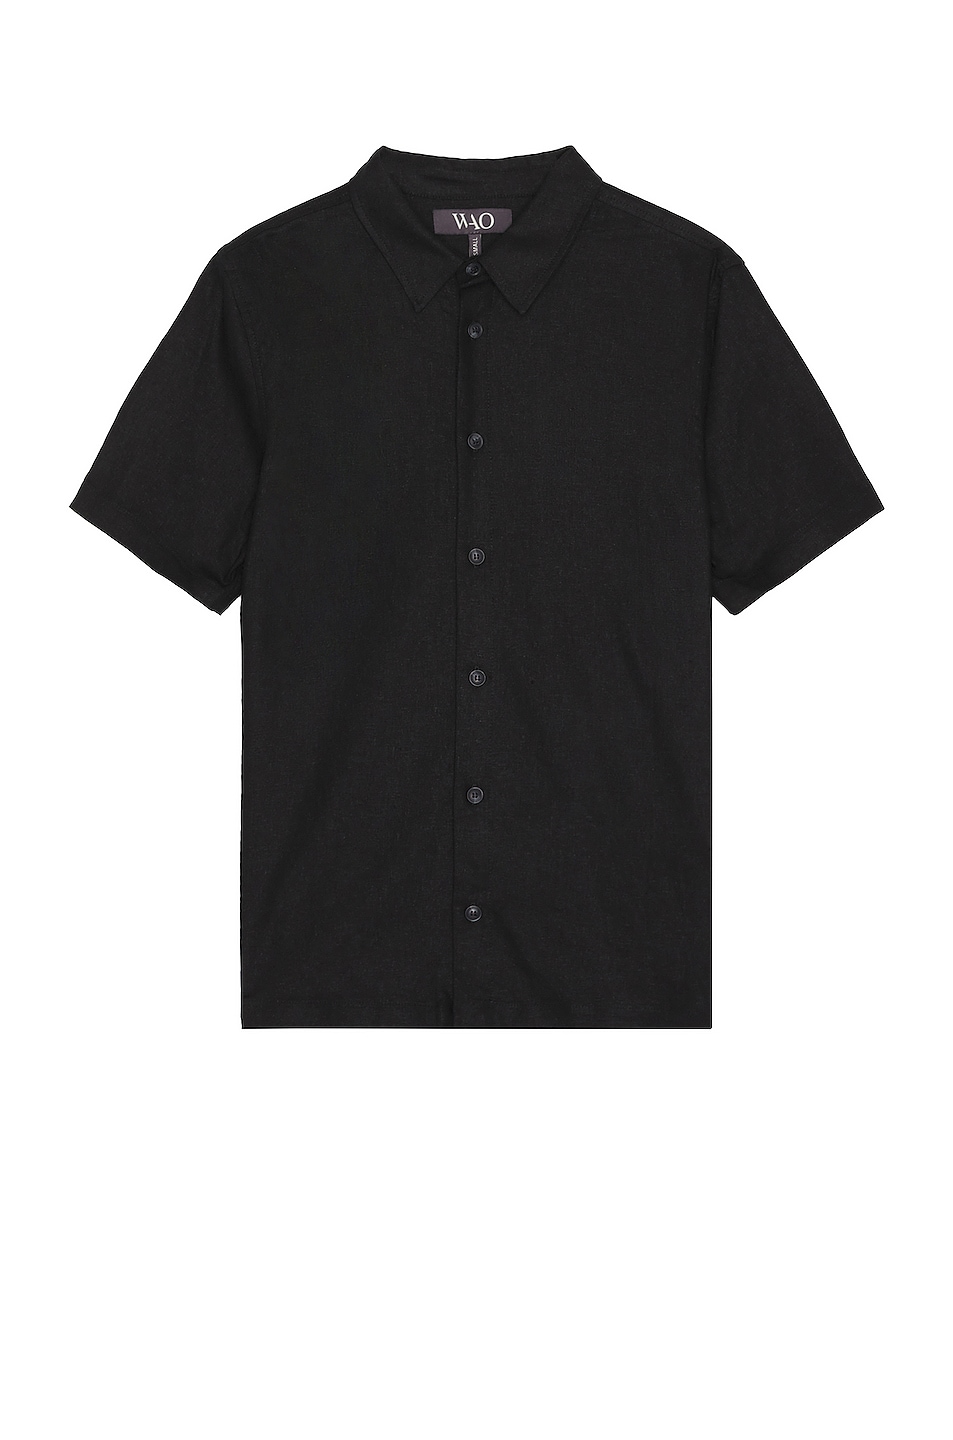 Image 1 of WAO The Short Sleeve Shirt in Black